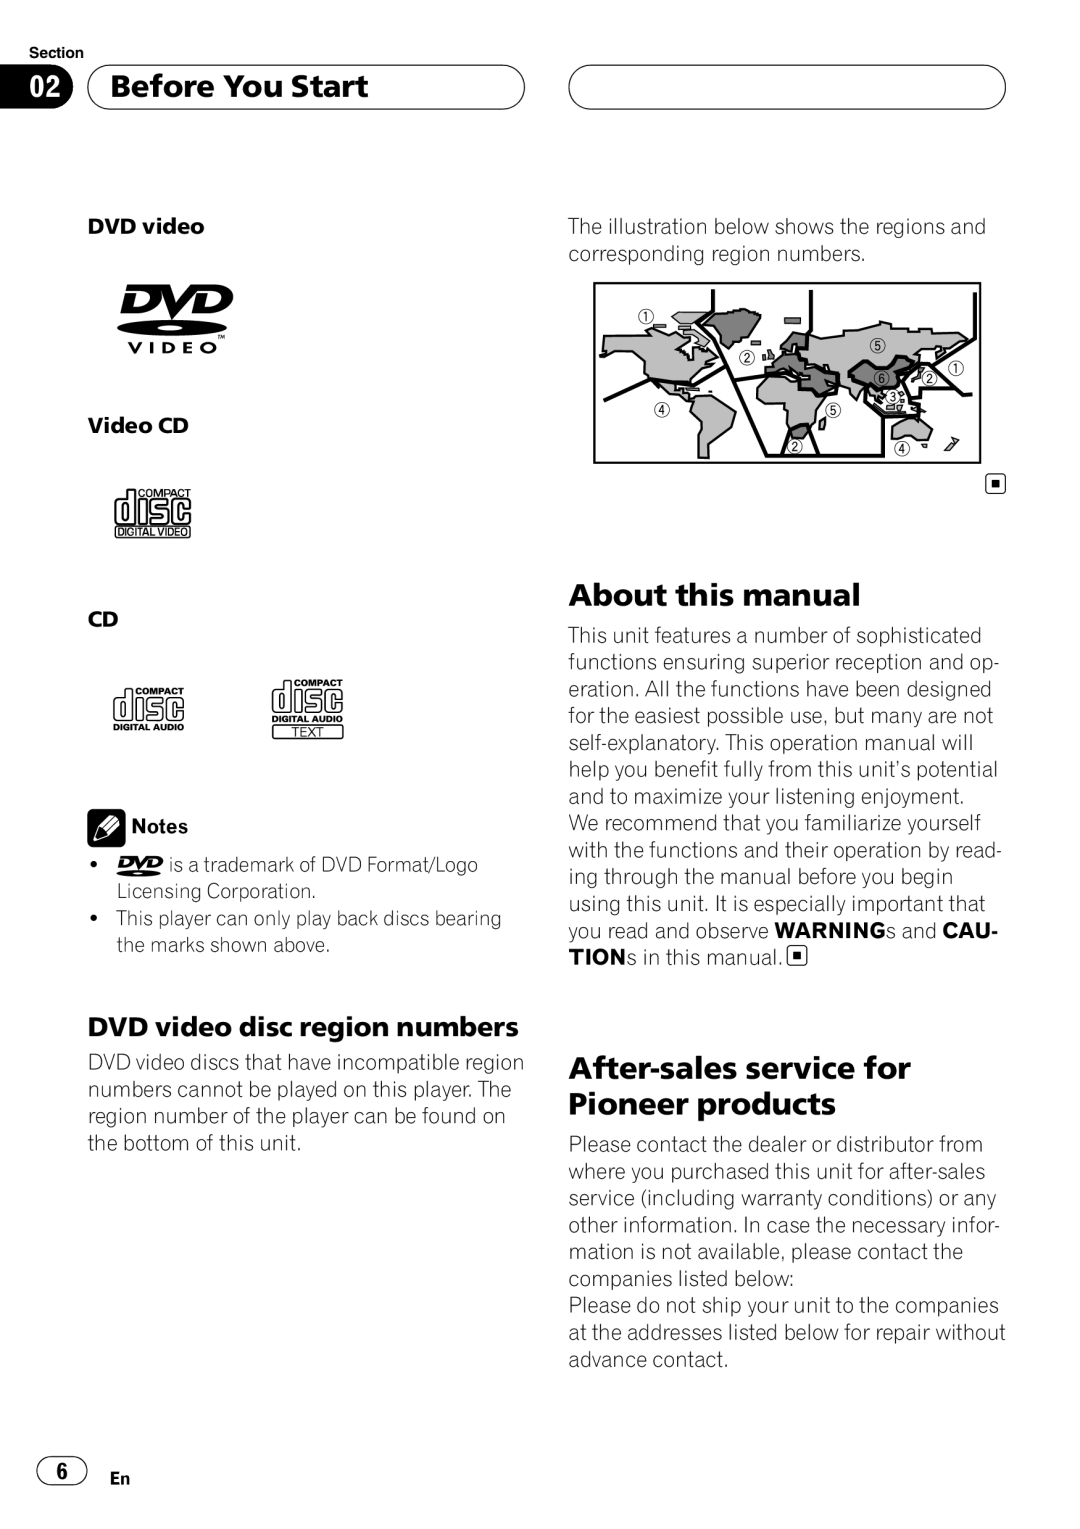 Pioneer AVH-P4900D operation manual Before You Start, About this manual, After-sales service for Pioneer products 